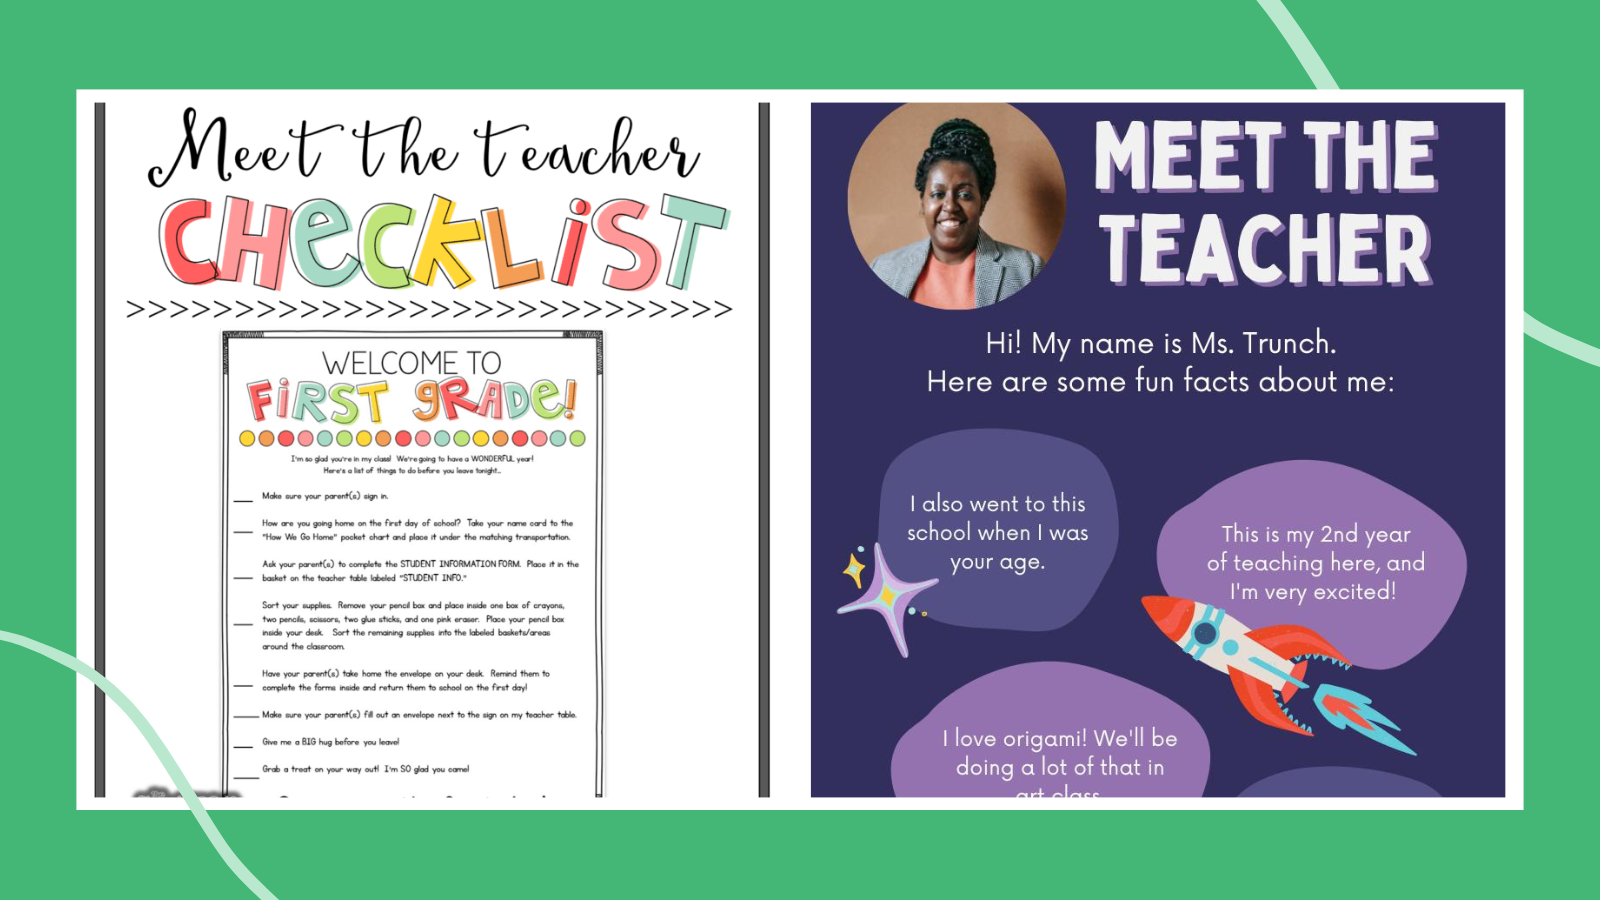 Teacher introduction letter examples including a Meet the Teacher checklist and Meet the Teacher fact sheet.